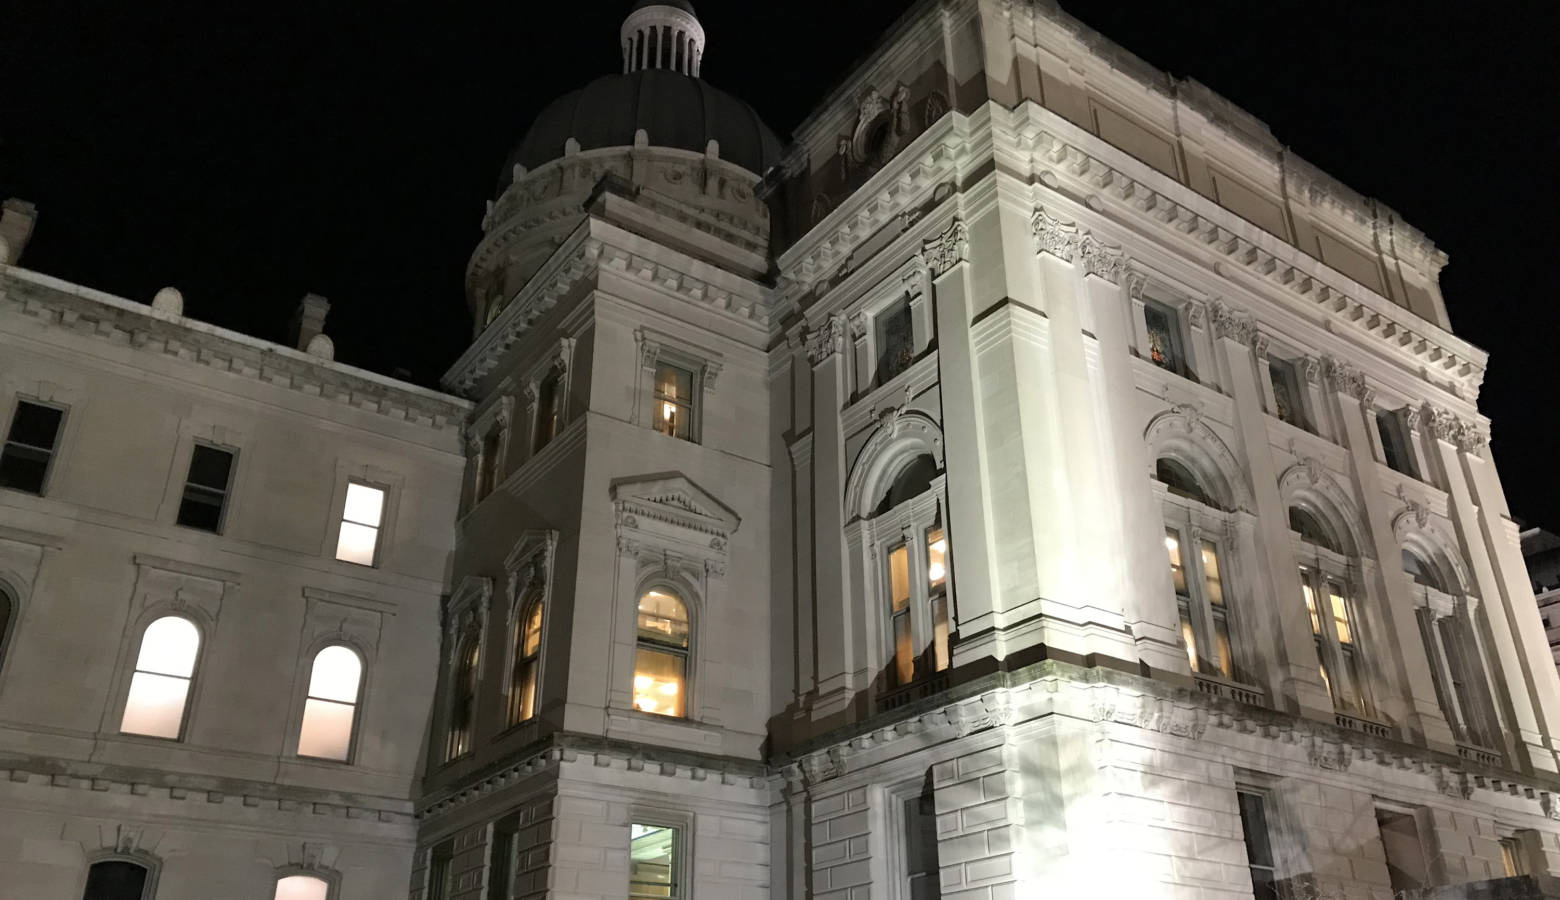 There's a contentious debate in Indiana's 2019 legislative session over whether to enact a hate crimes statute. (Brandon Smith/IPB News)